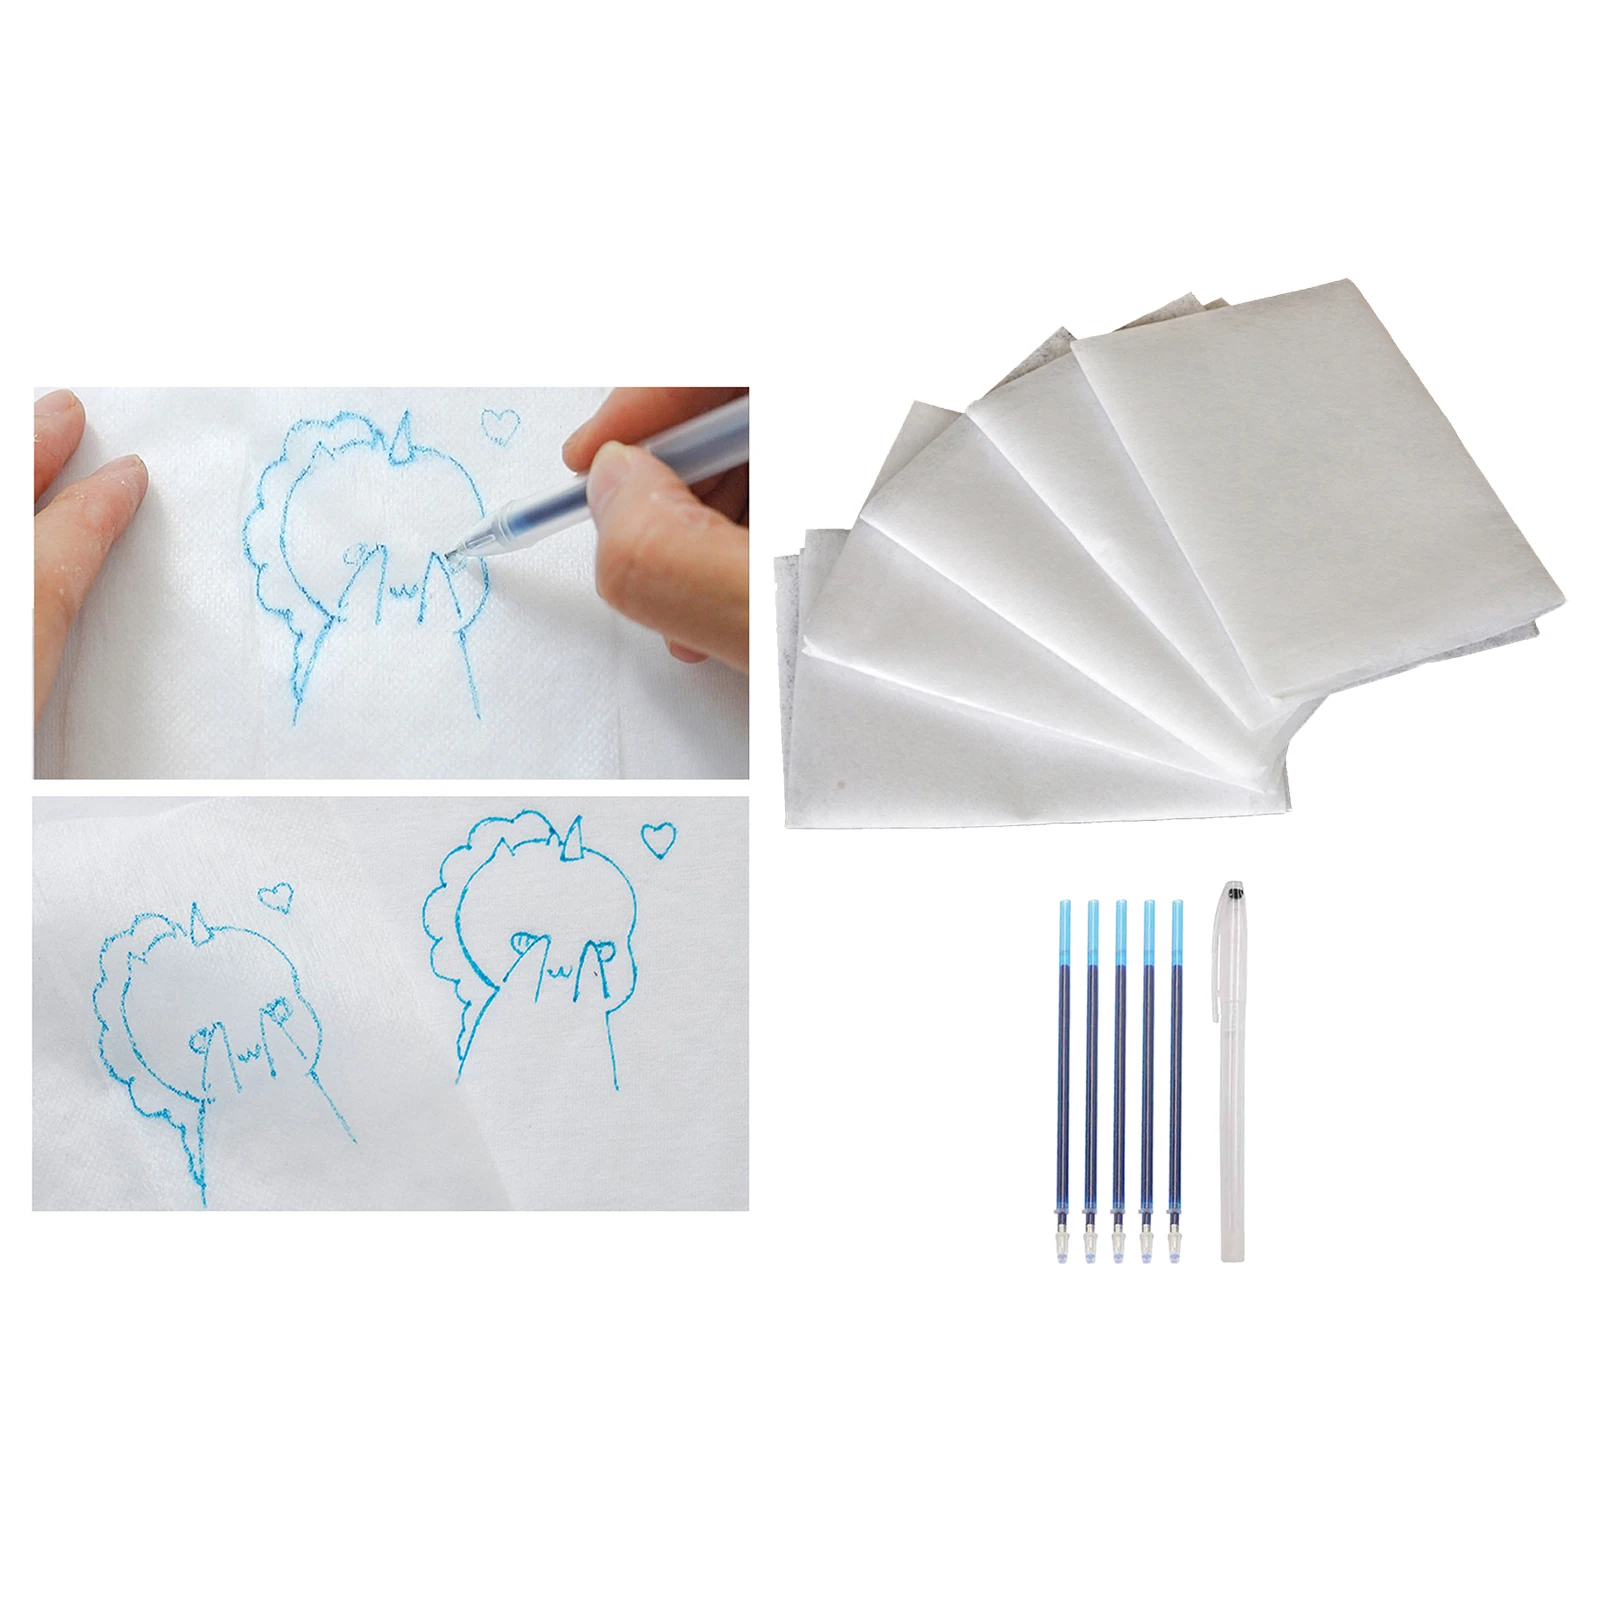 5 Sheets Water Soluble Embroidery Stabilizer Transfer Paper with Pen